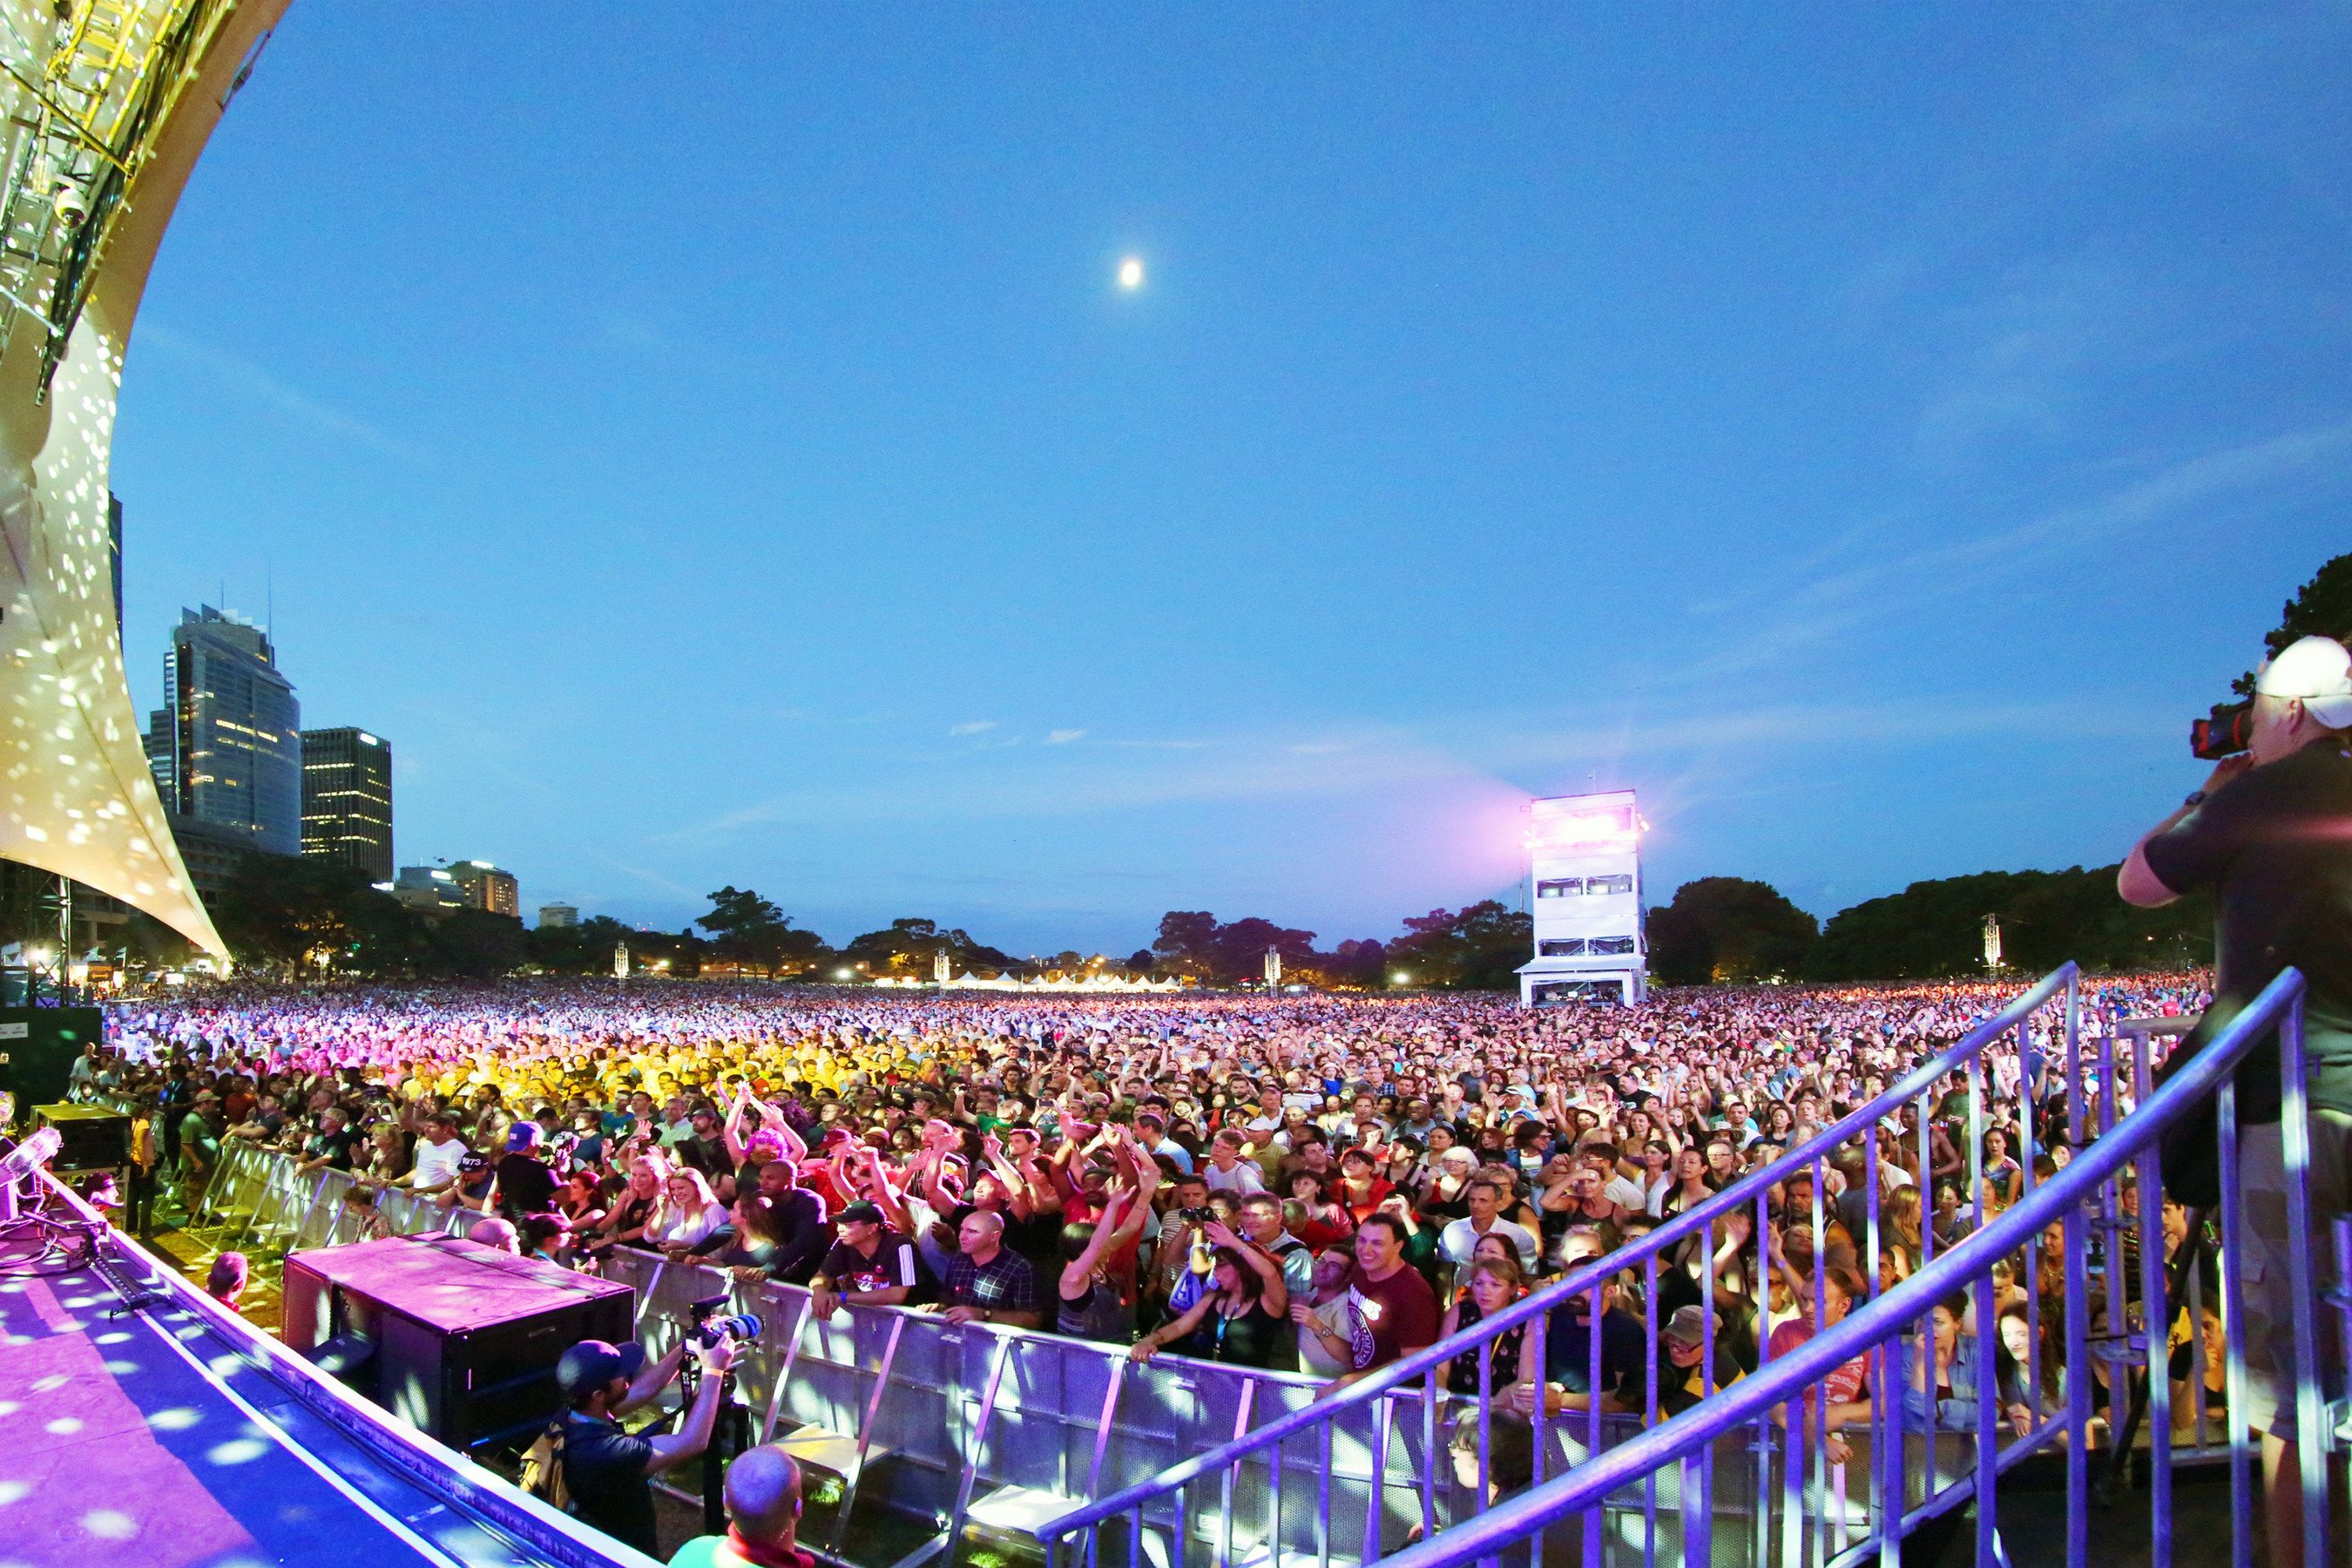 The popular free concert series Summer Sounds in The Domain. Photo credit Prudence Upton. Sydney Festival populates the Domain with over 60,000 attendees for its famous free concerts, bringing the city together in a cultural and communal celebration.